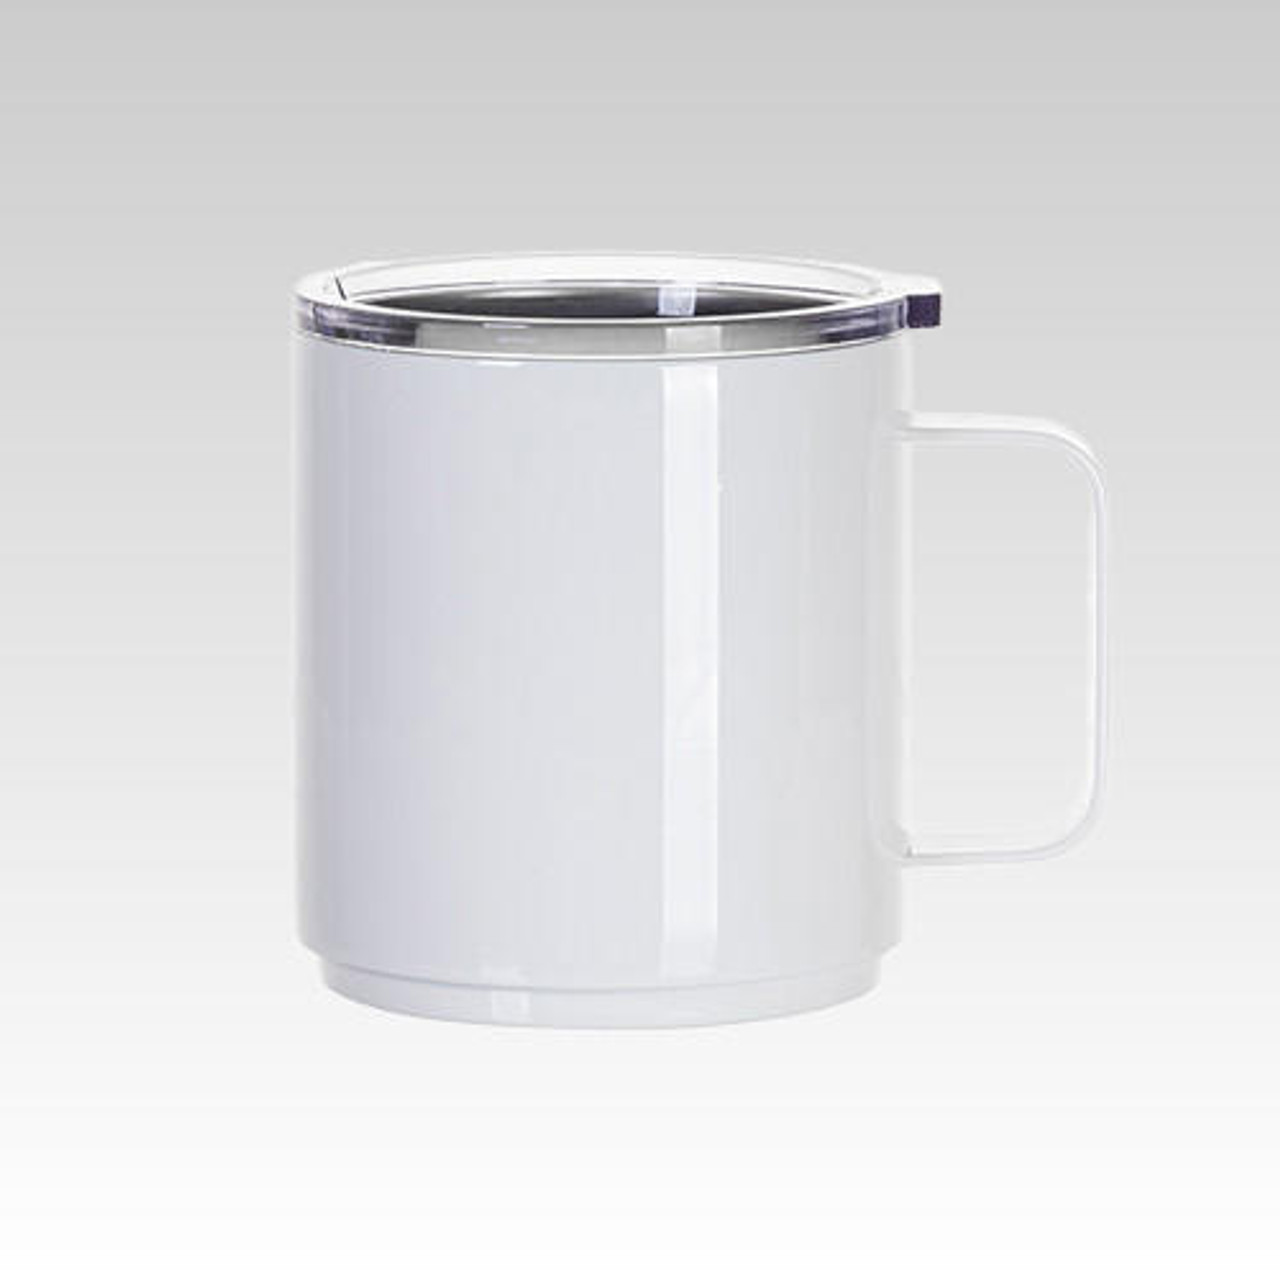 https://cdn11.bigcommerce.com/s-et4qthkygq/images/stencil/1280x1280/products/9877/34384/walablanks-stackable-stainless-steel-coffee-mug-13oz__36802.1661357139.jpg?c=2